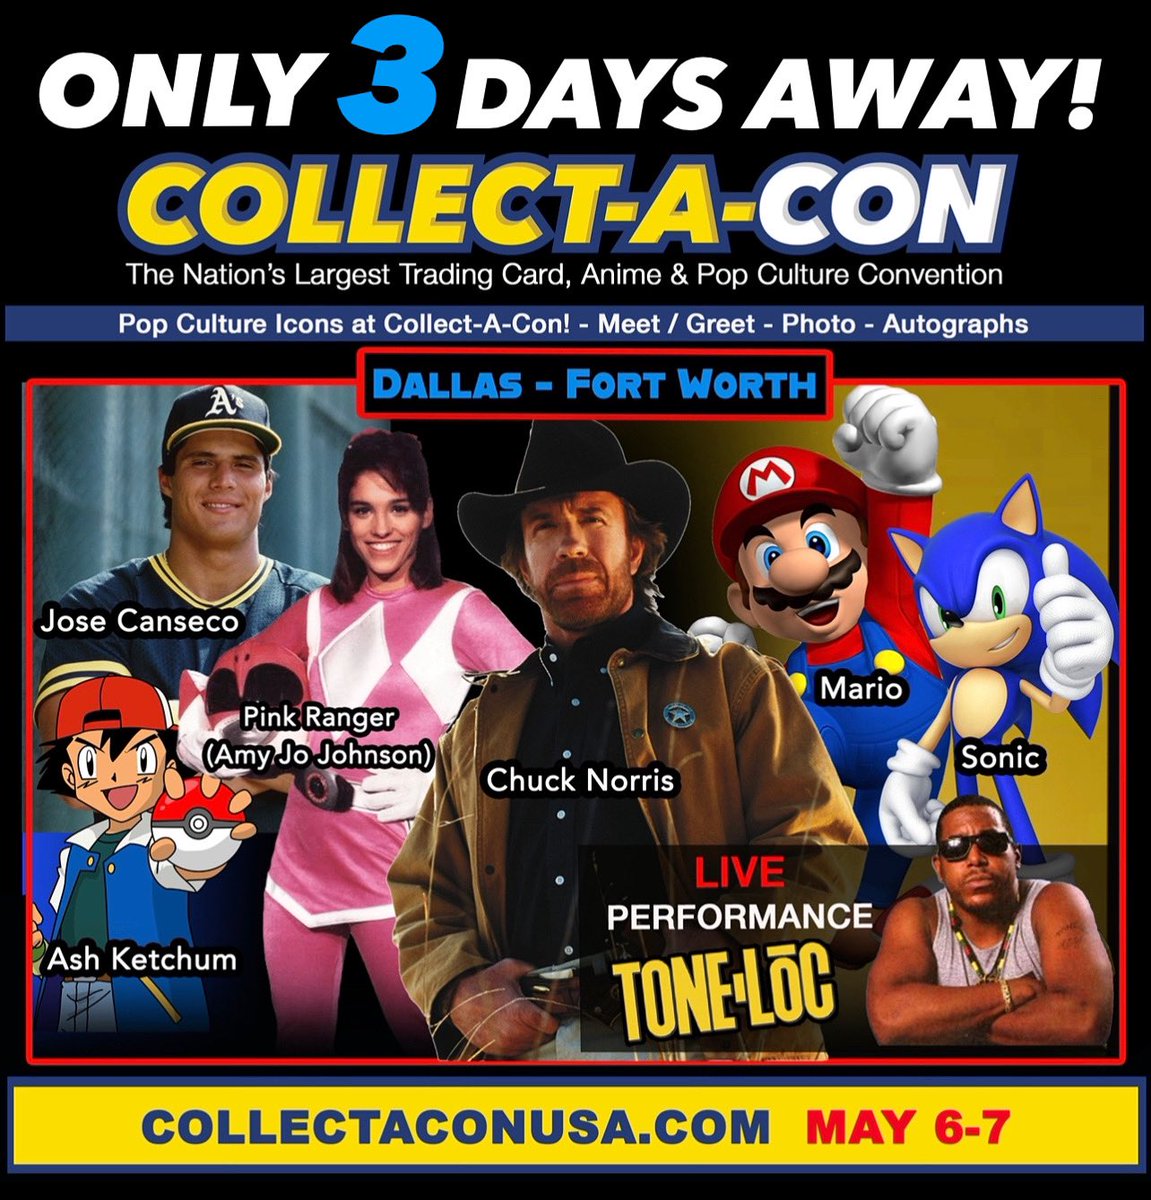 raz on Twitter "RT Collect_A_Con CollectACon Dallas / Ft Worth is